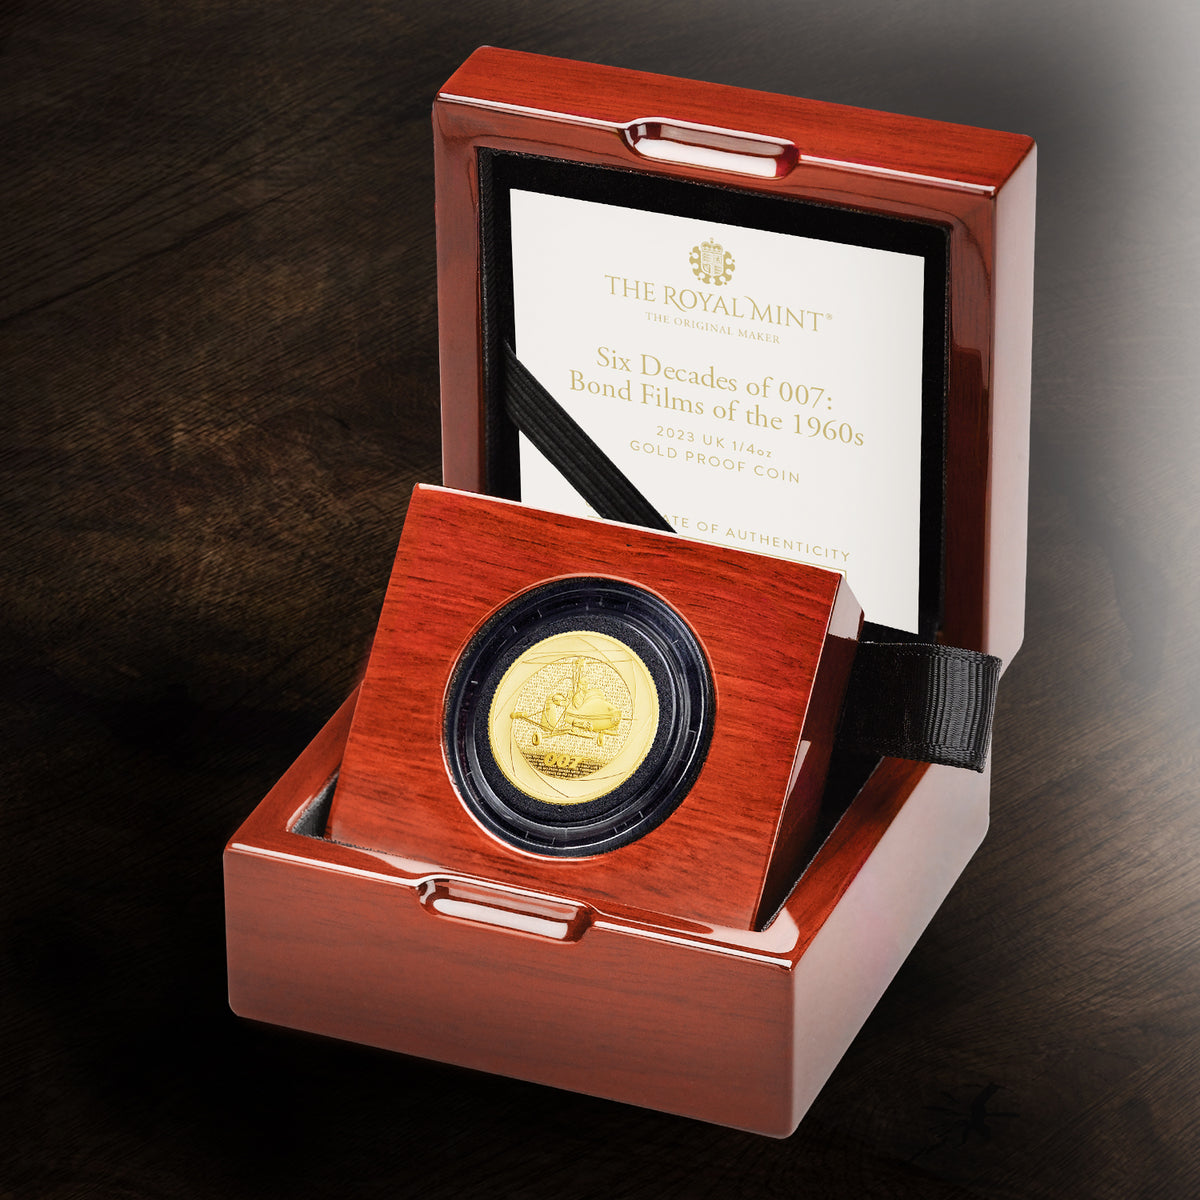 James Bond 1/4oz Gold Proof Coin - 1960s Numbered Edition - By The Royal Mint